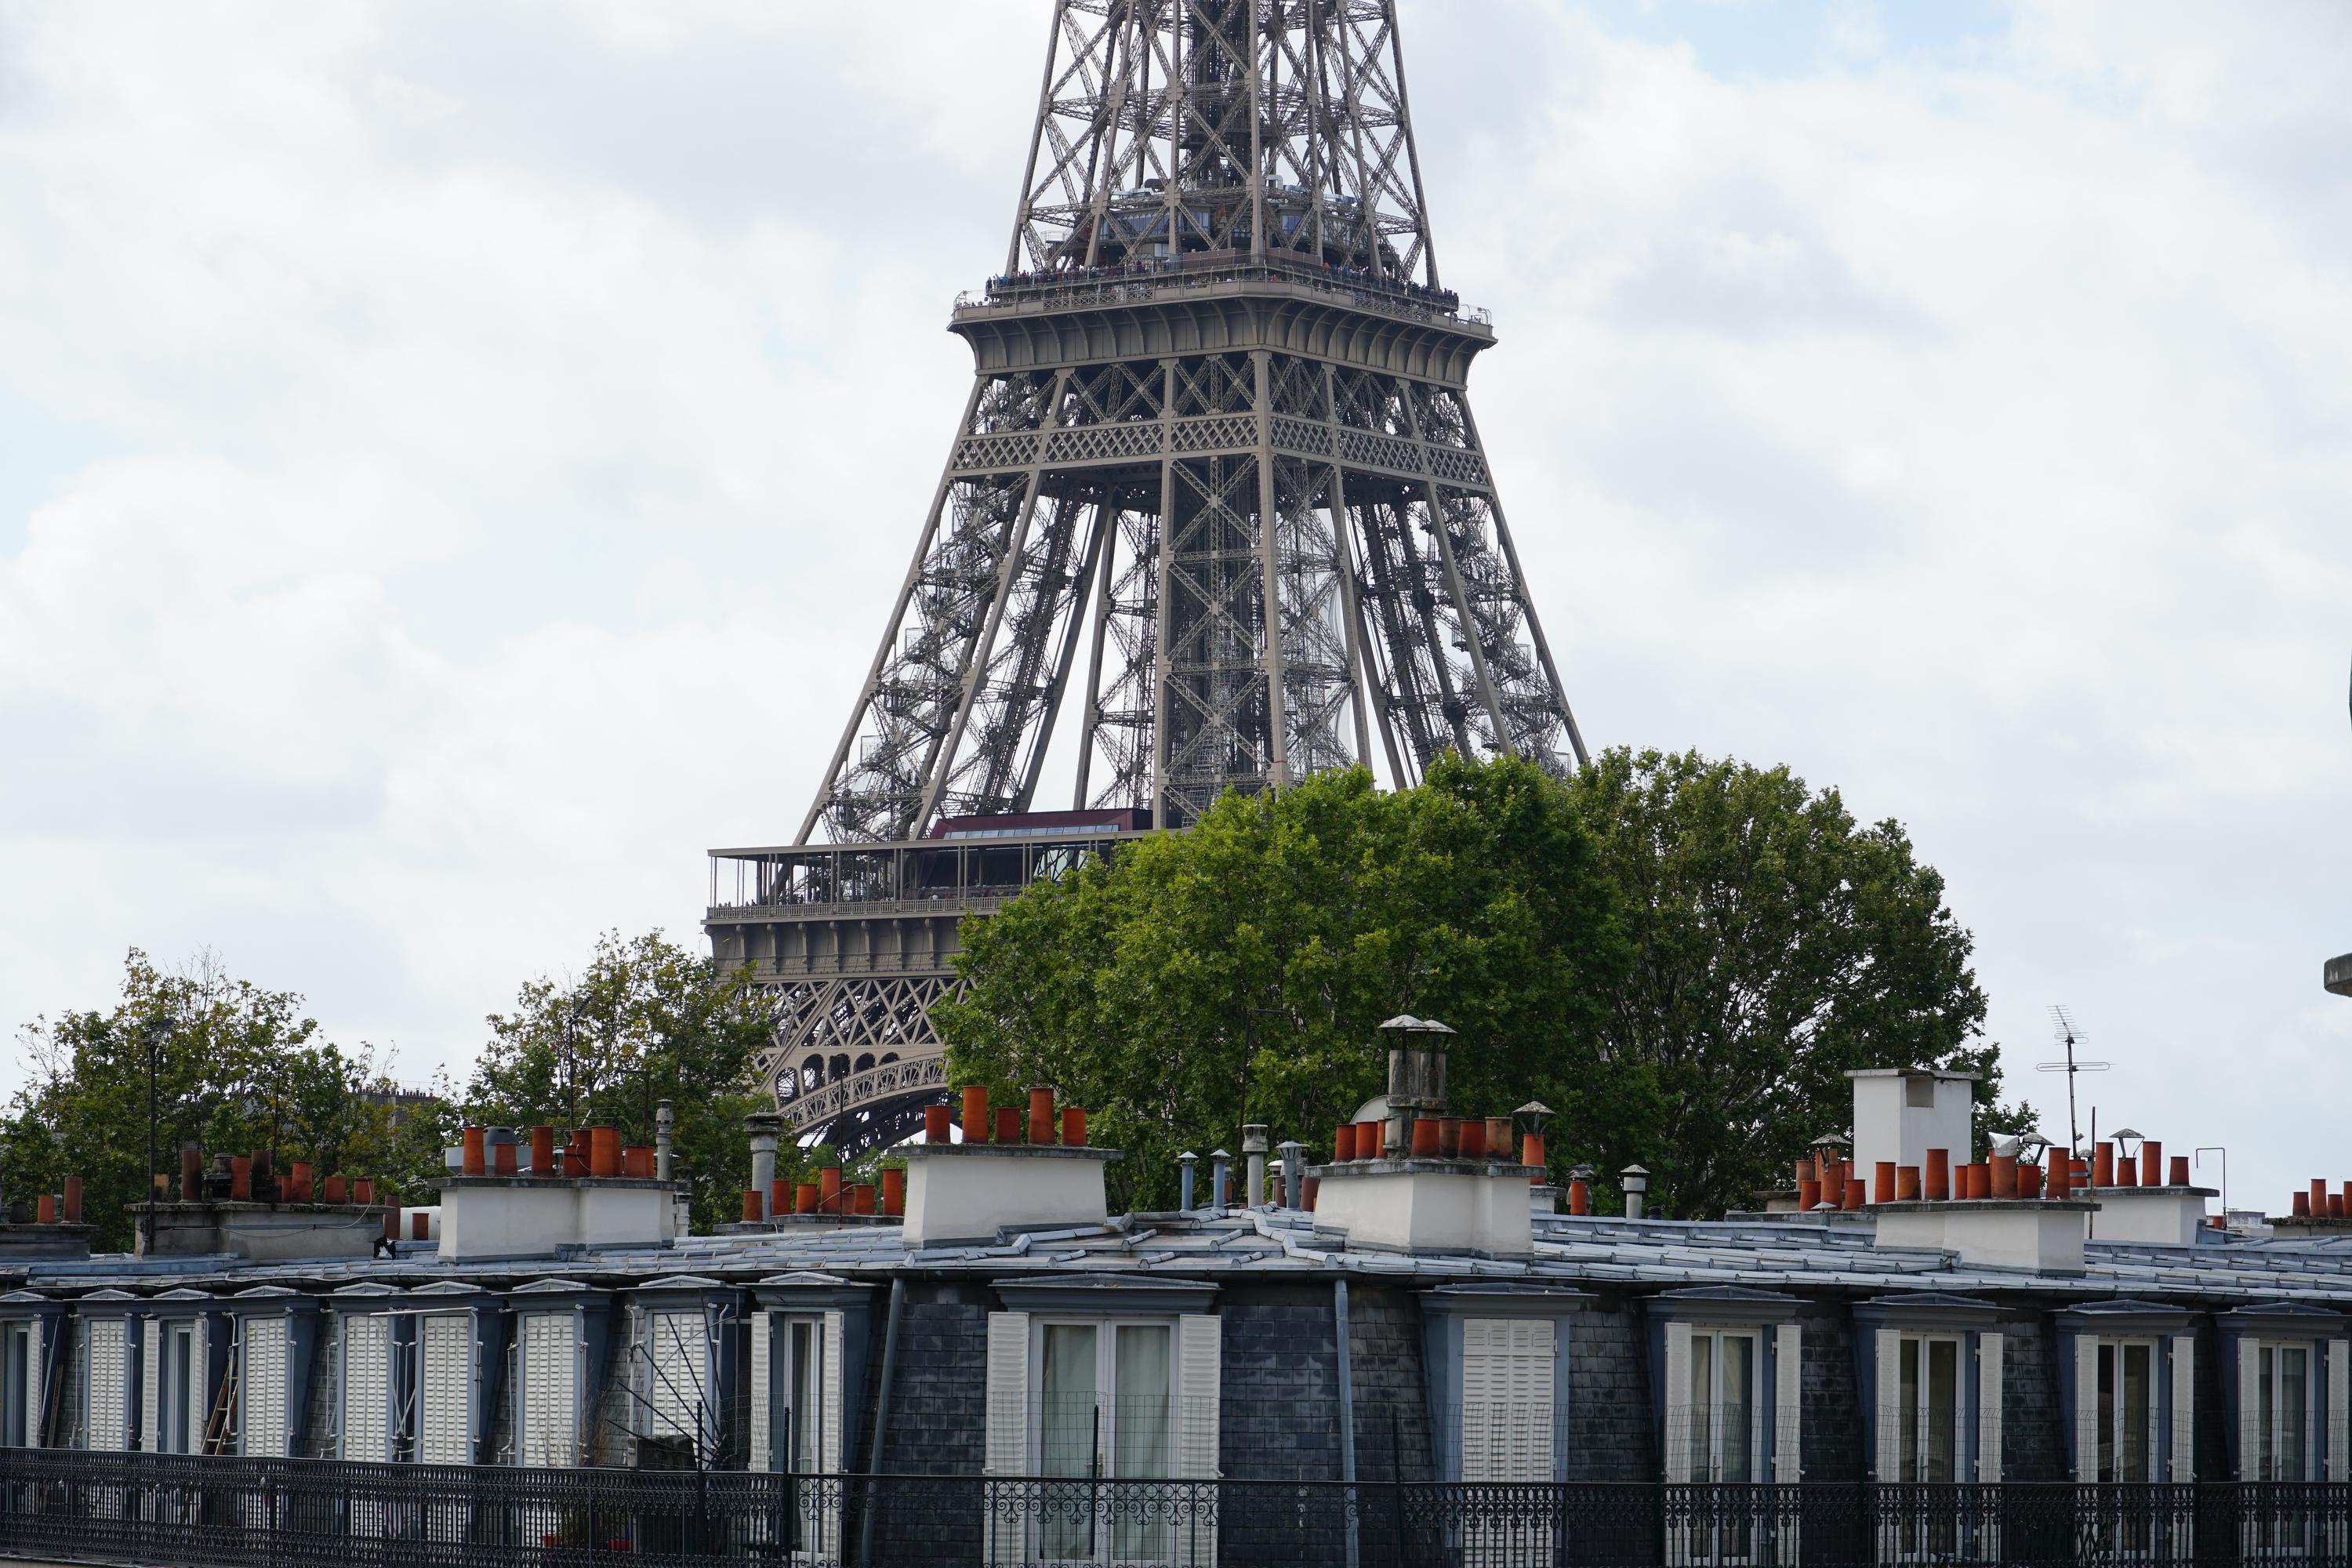 The view of the Eiffel Tower from the top of the stairs next to Palais de Tokyo